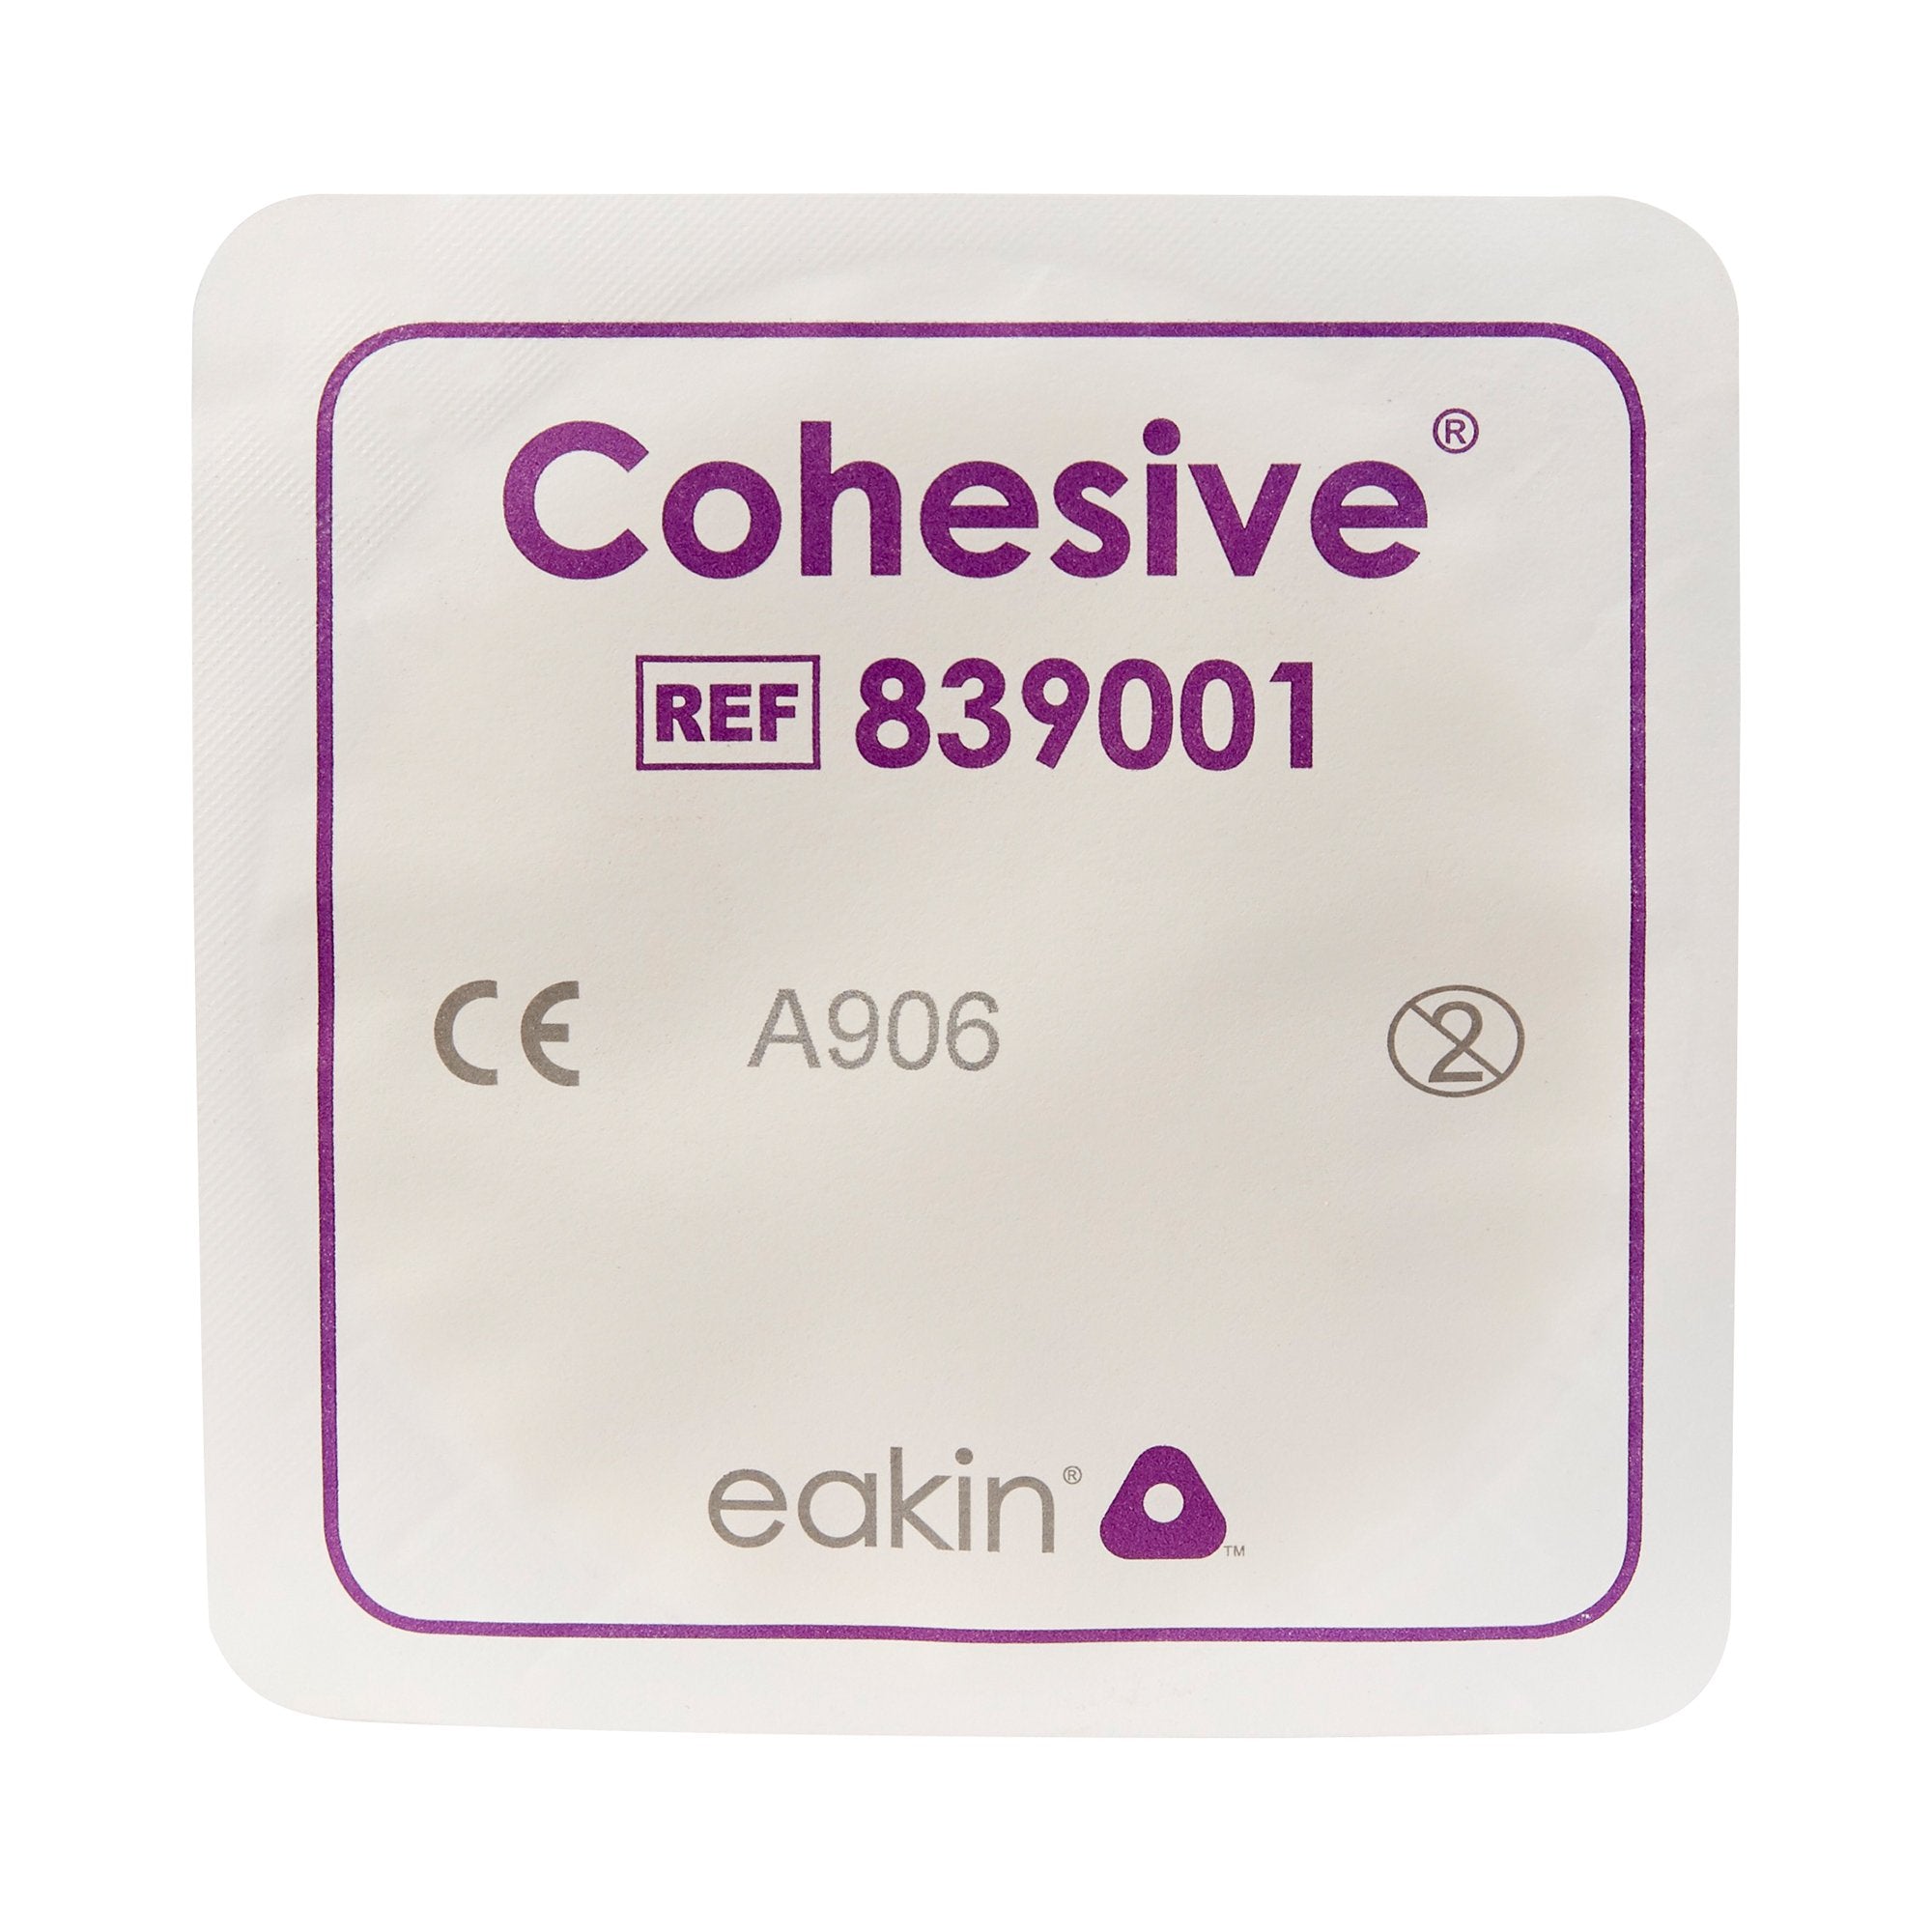 Ostomy Appliance Seal Eakin Cohesive® 4 Inch, Large, Moldable Hydrocolloid